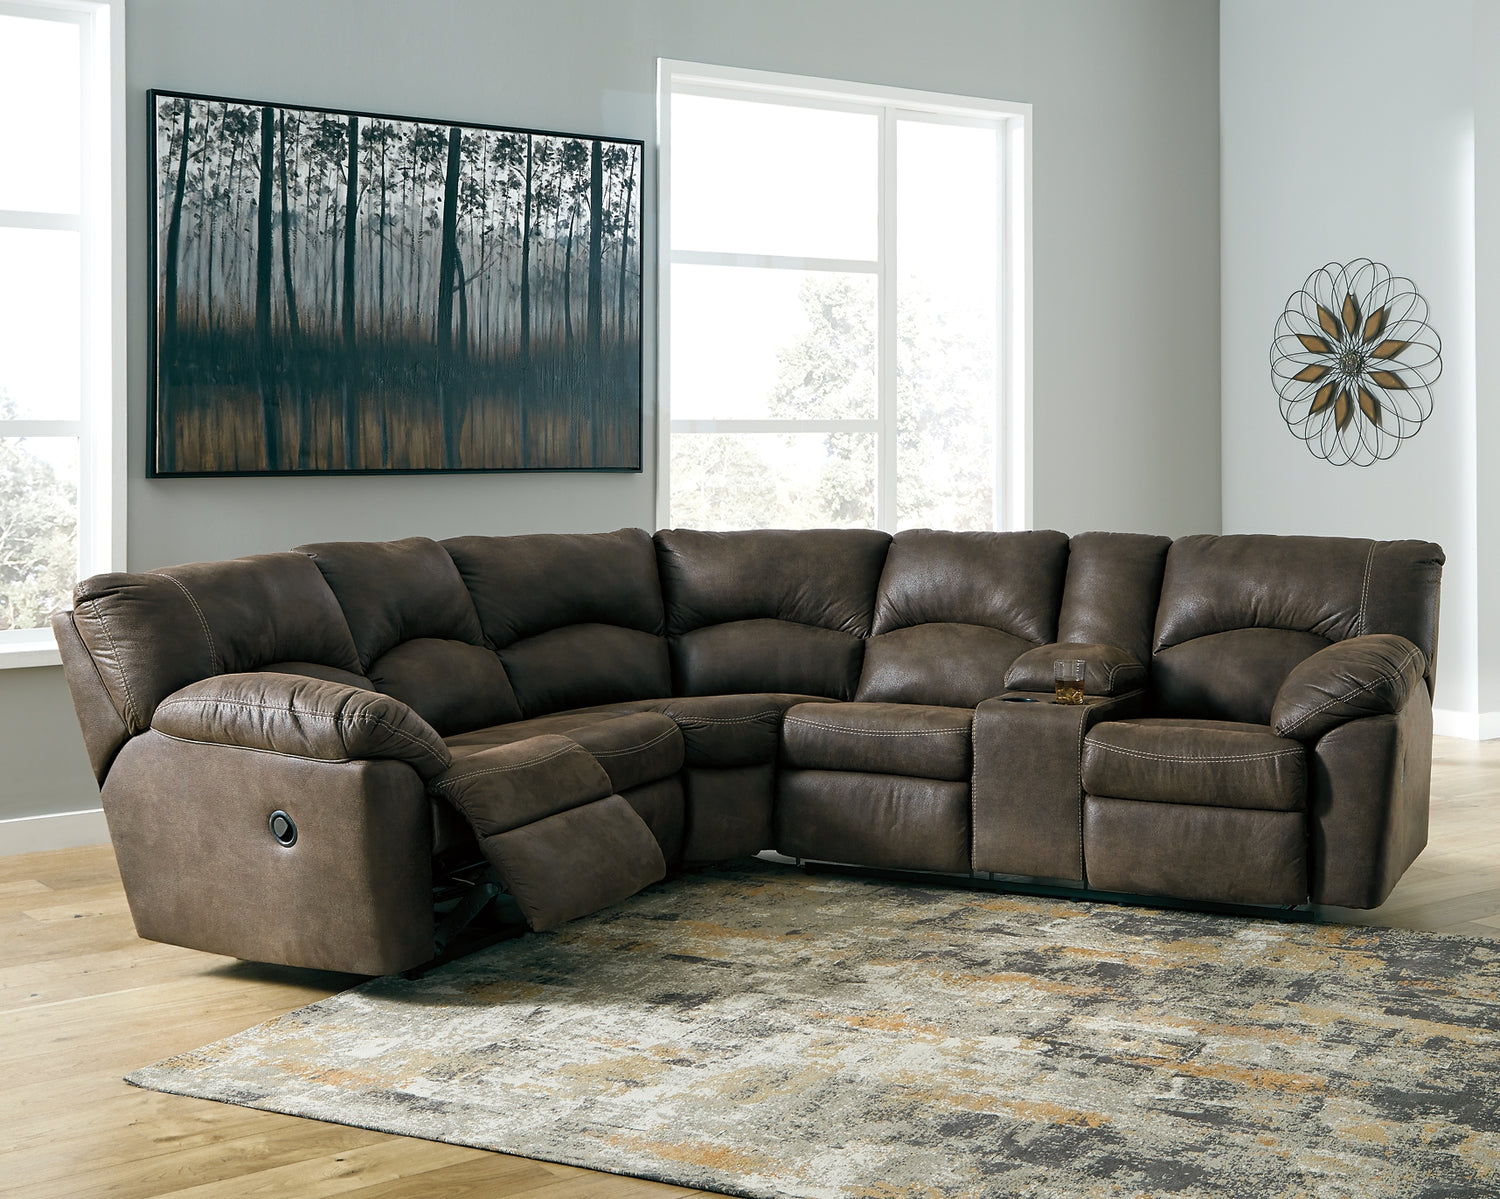 Living Room > Reclining Furniture > Reclining Sectional